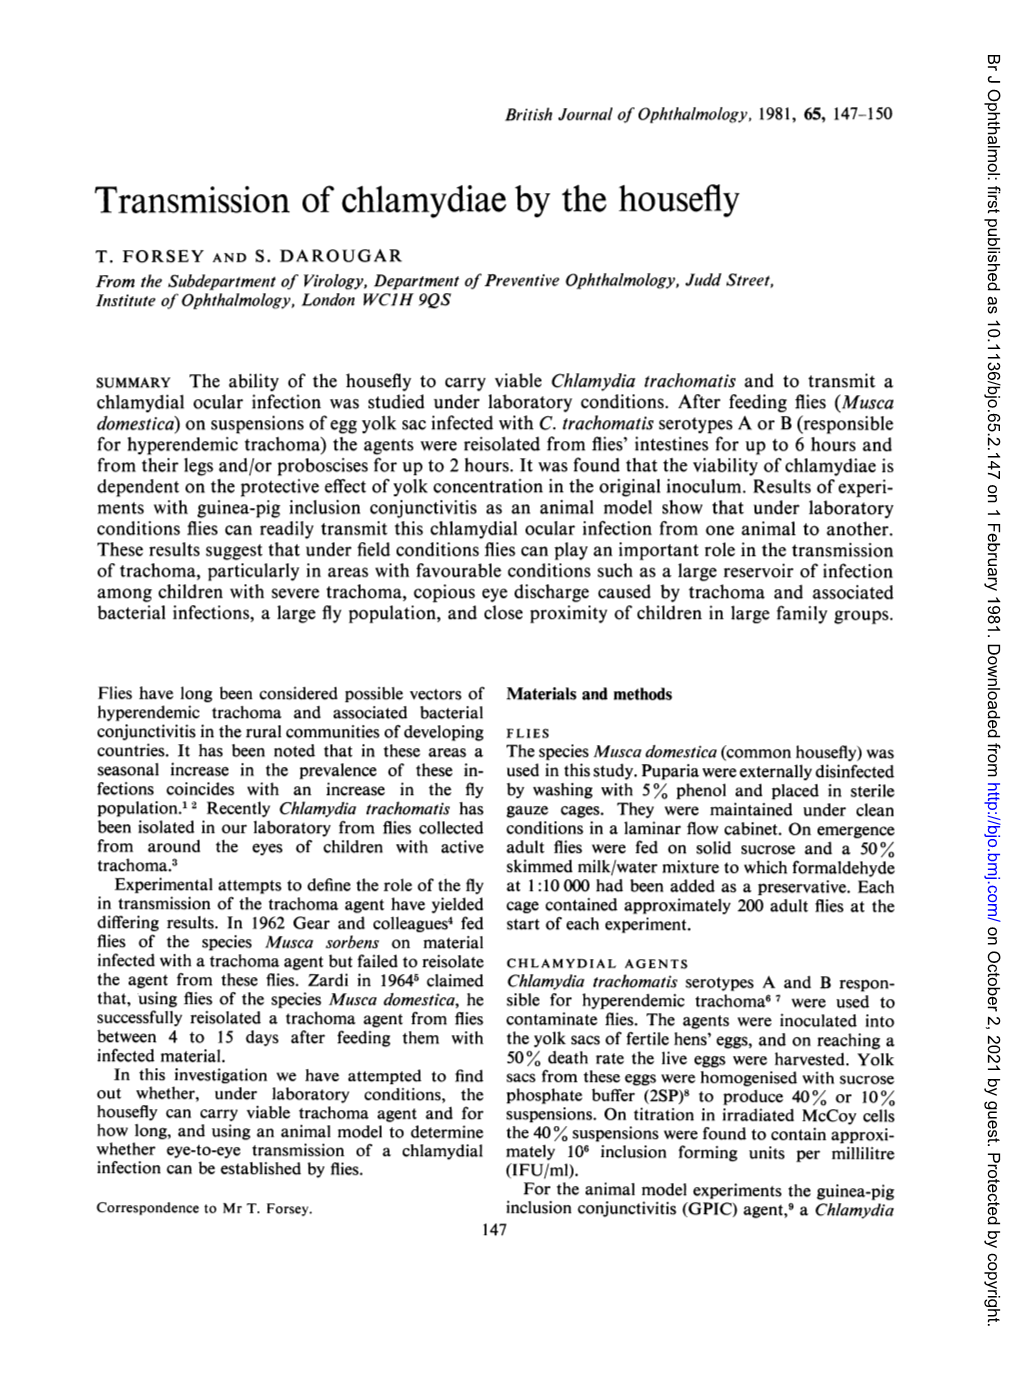 Transmission of Chlamydiae by the Housefly